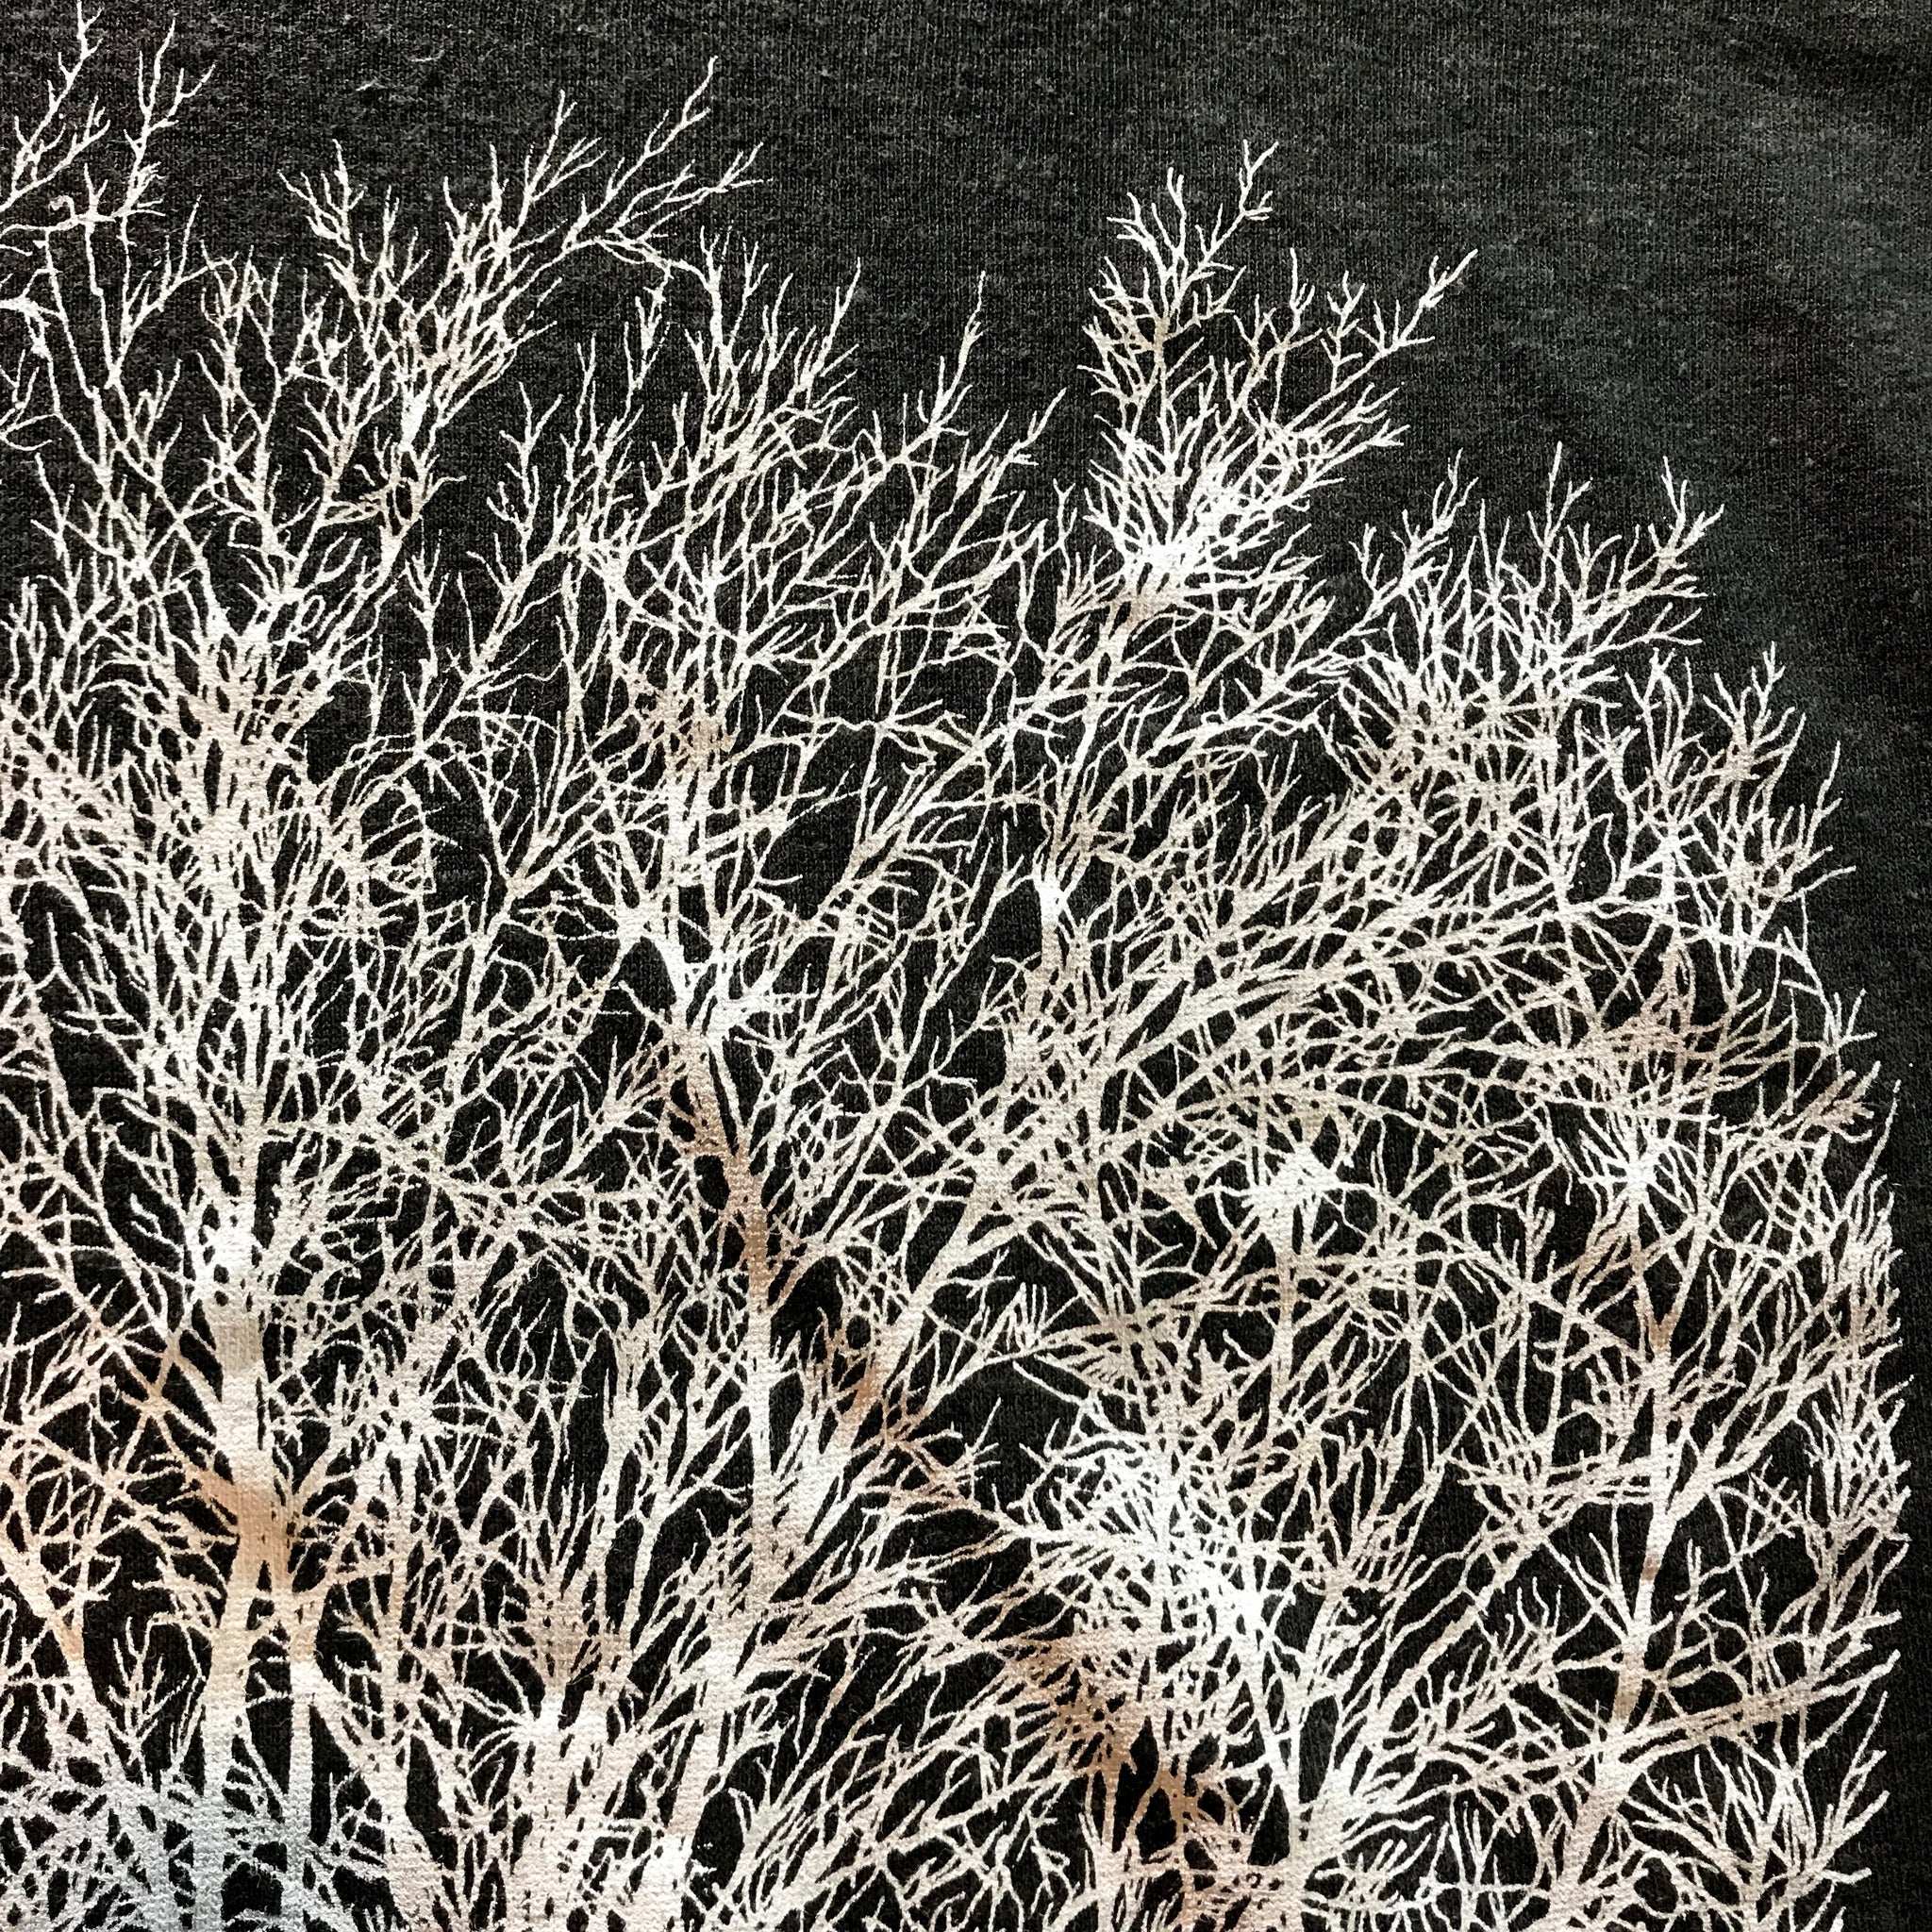 From My Cold Hands Screen Printed T-Shirt